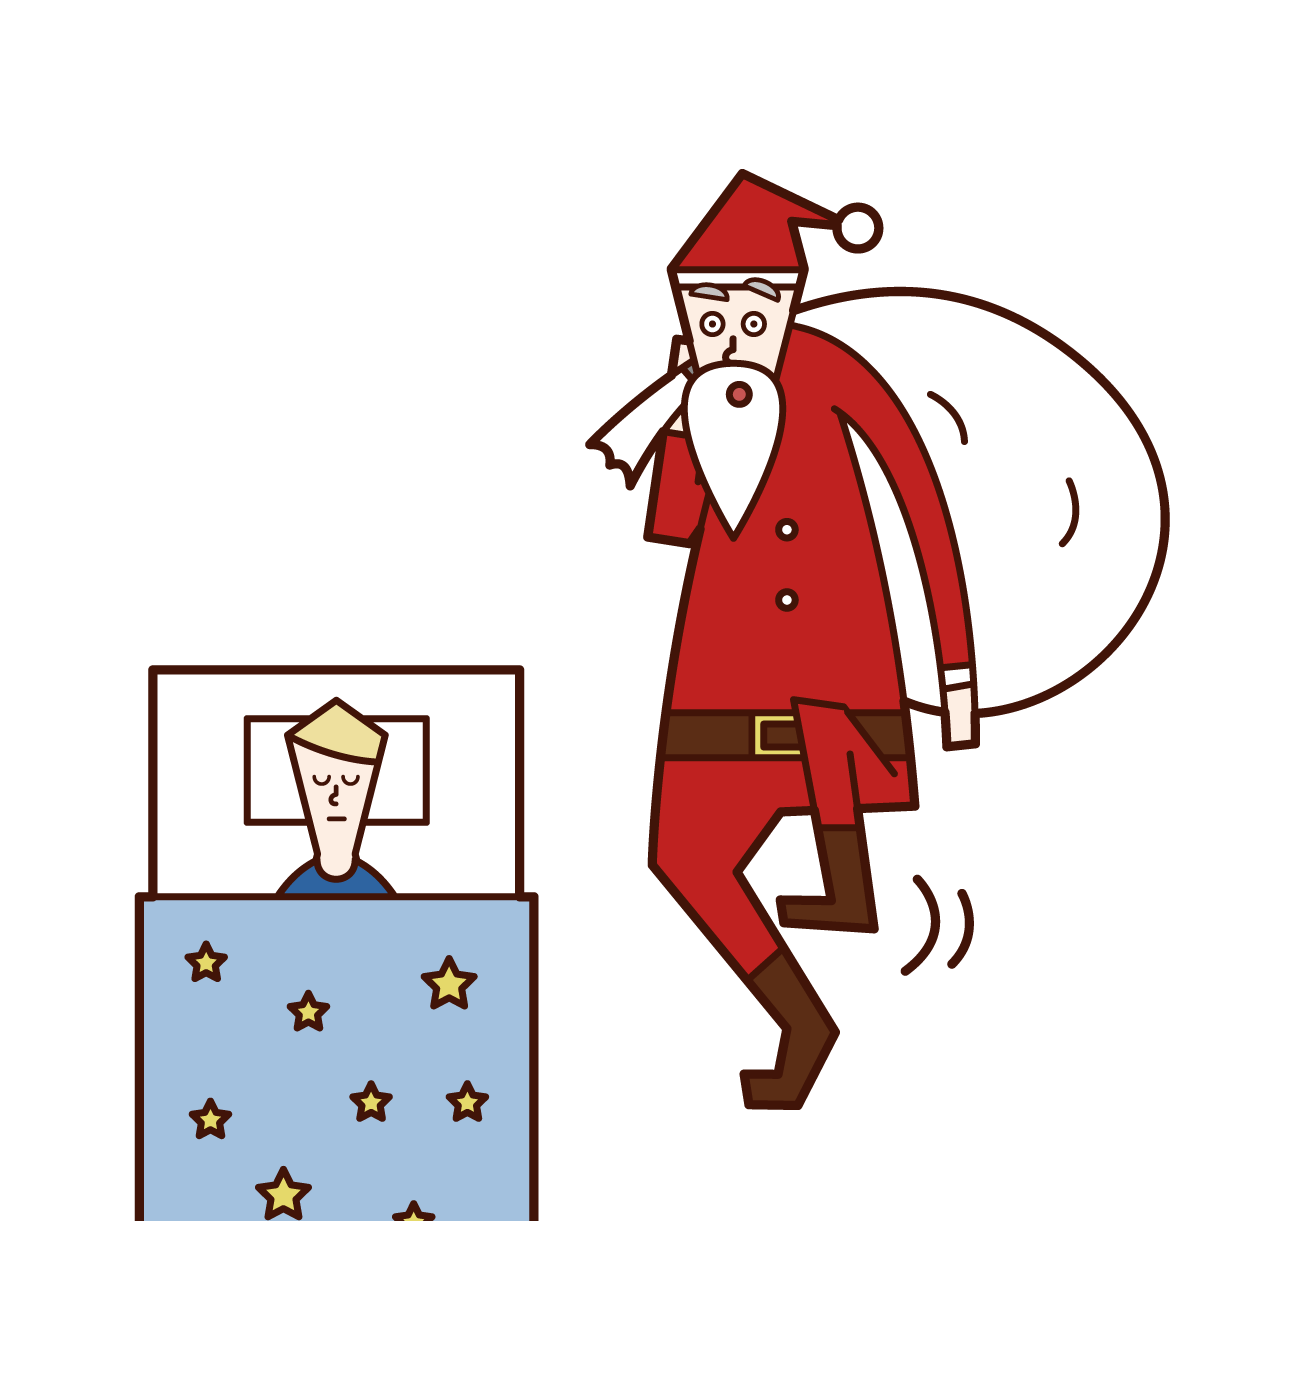 Illustration of Santa Claus giving a present to a sleeping child